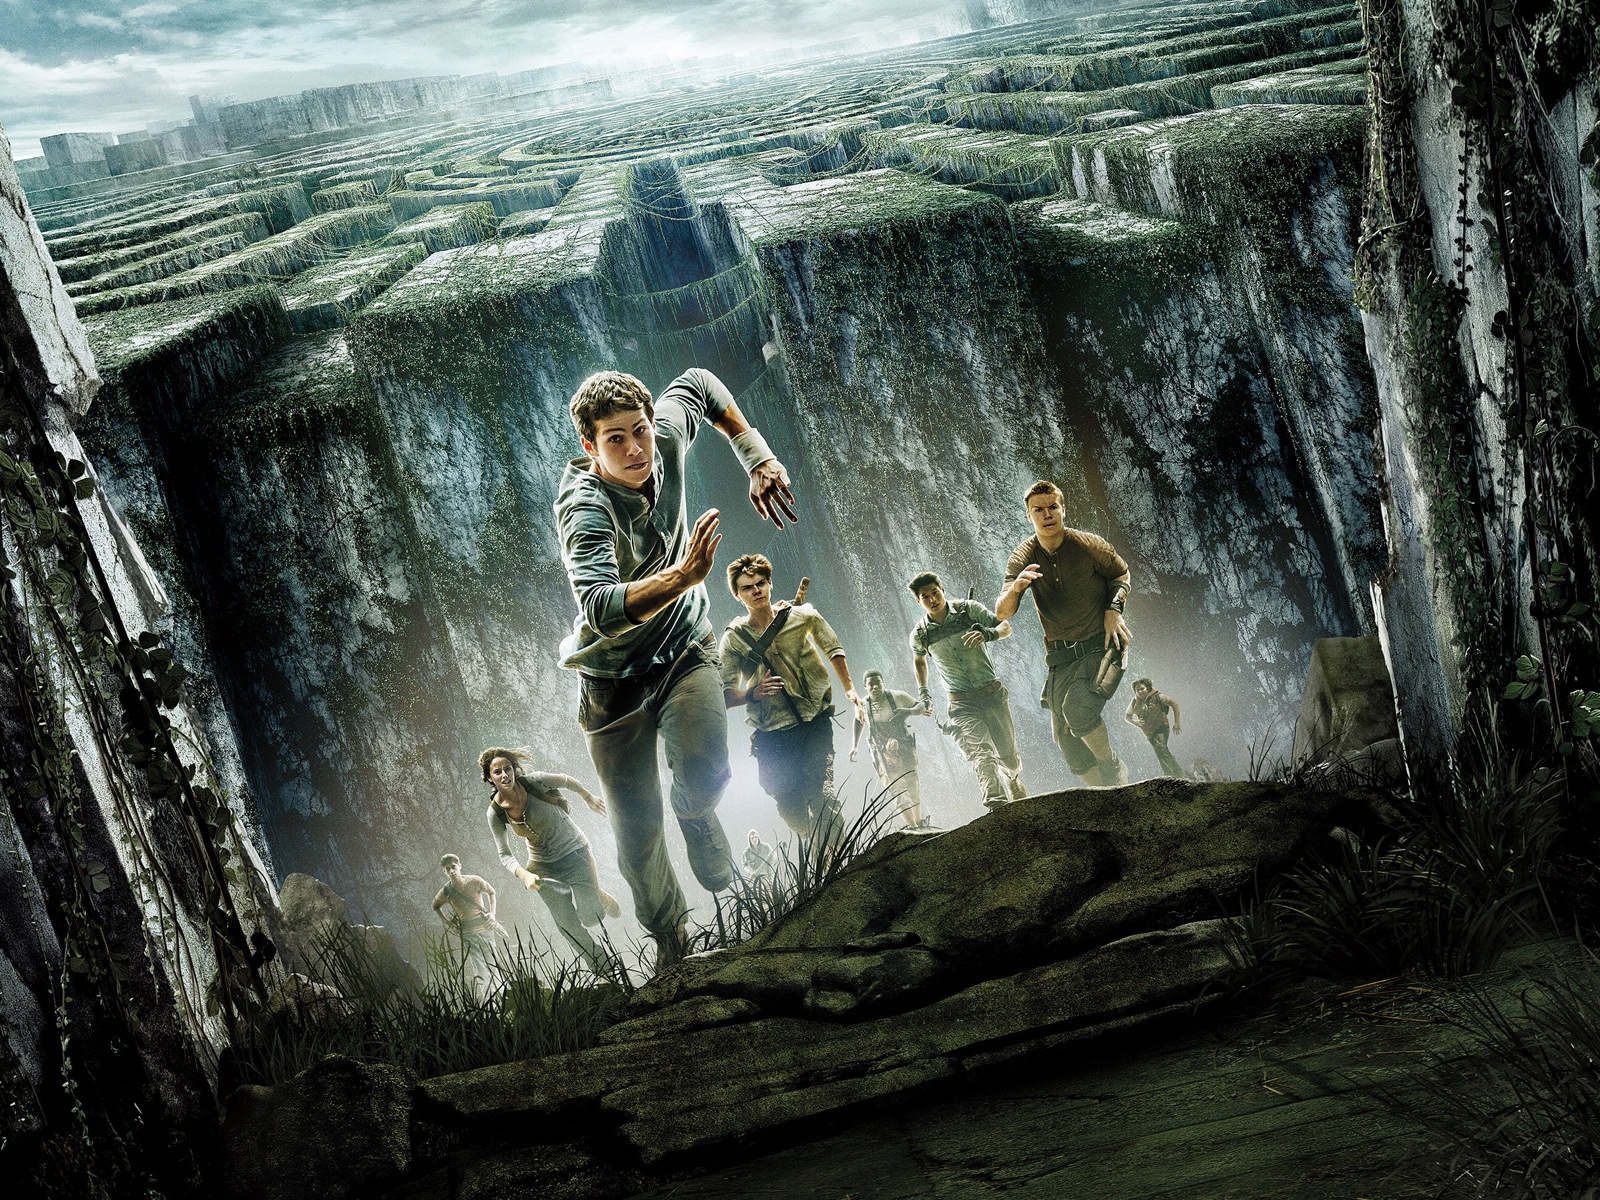 The Maze Runner HD movie wallpapers #6 - 1600x1200